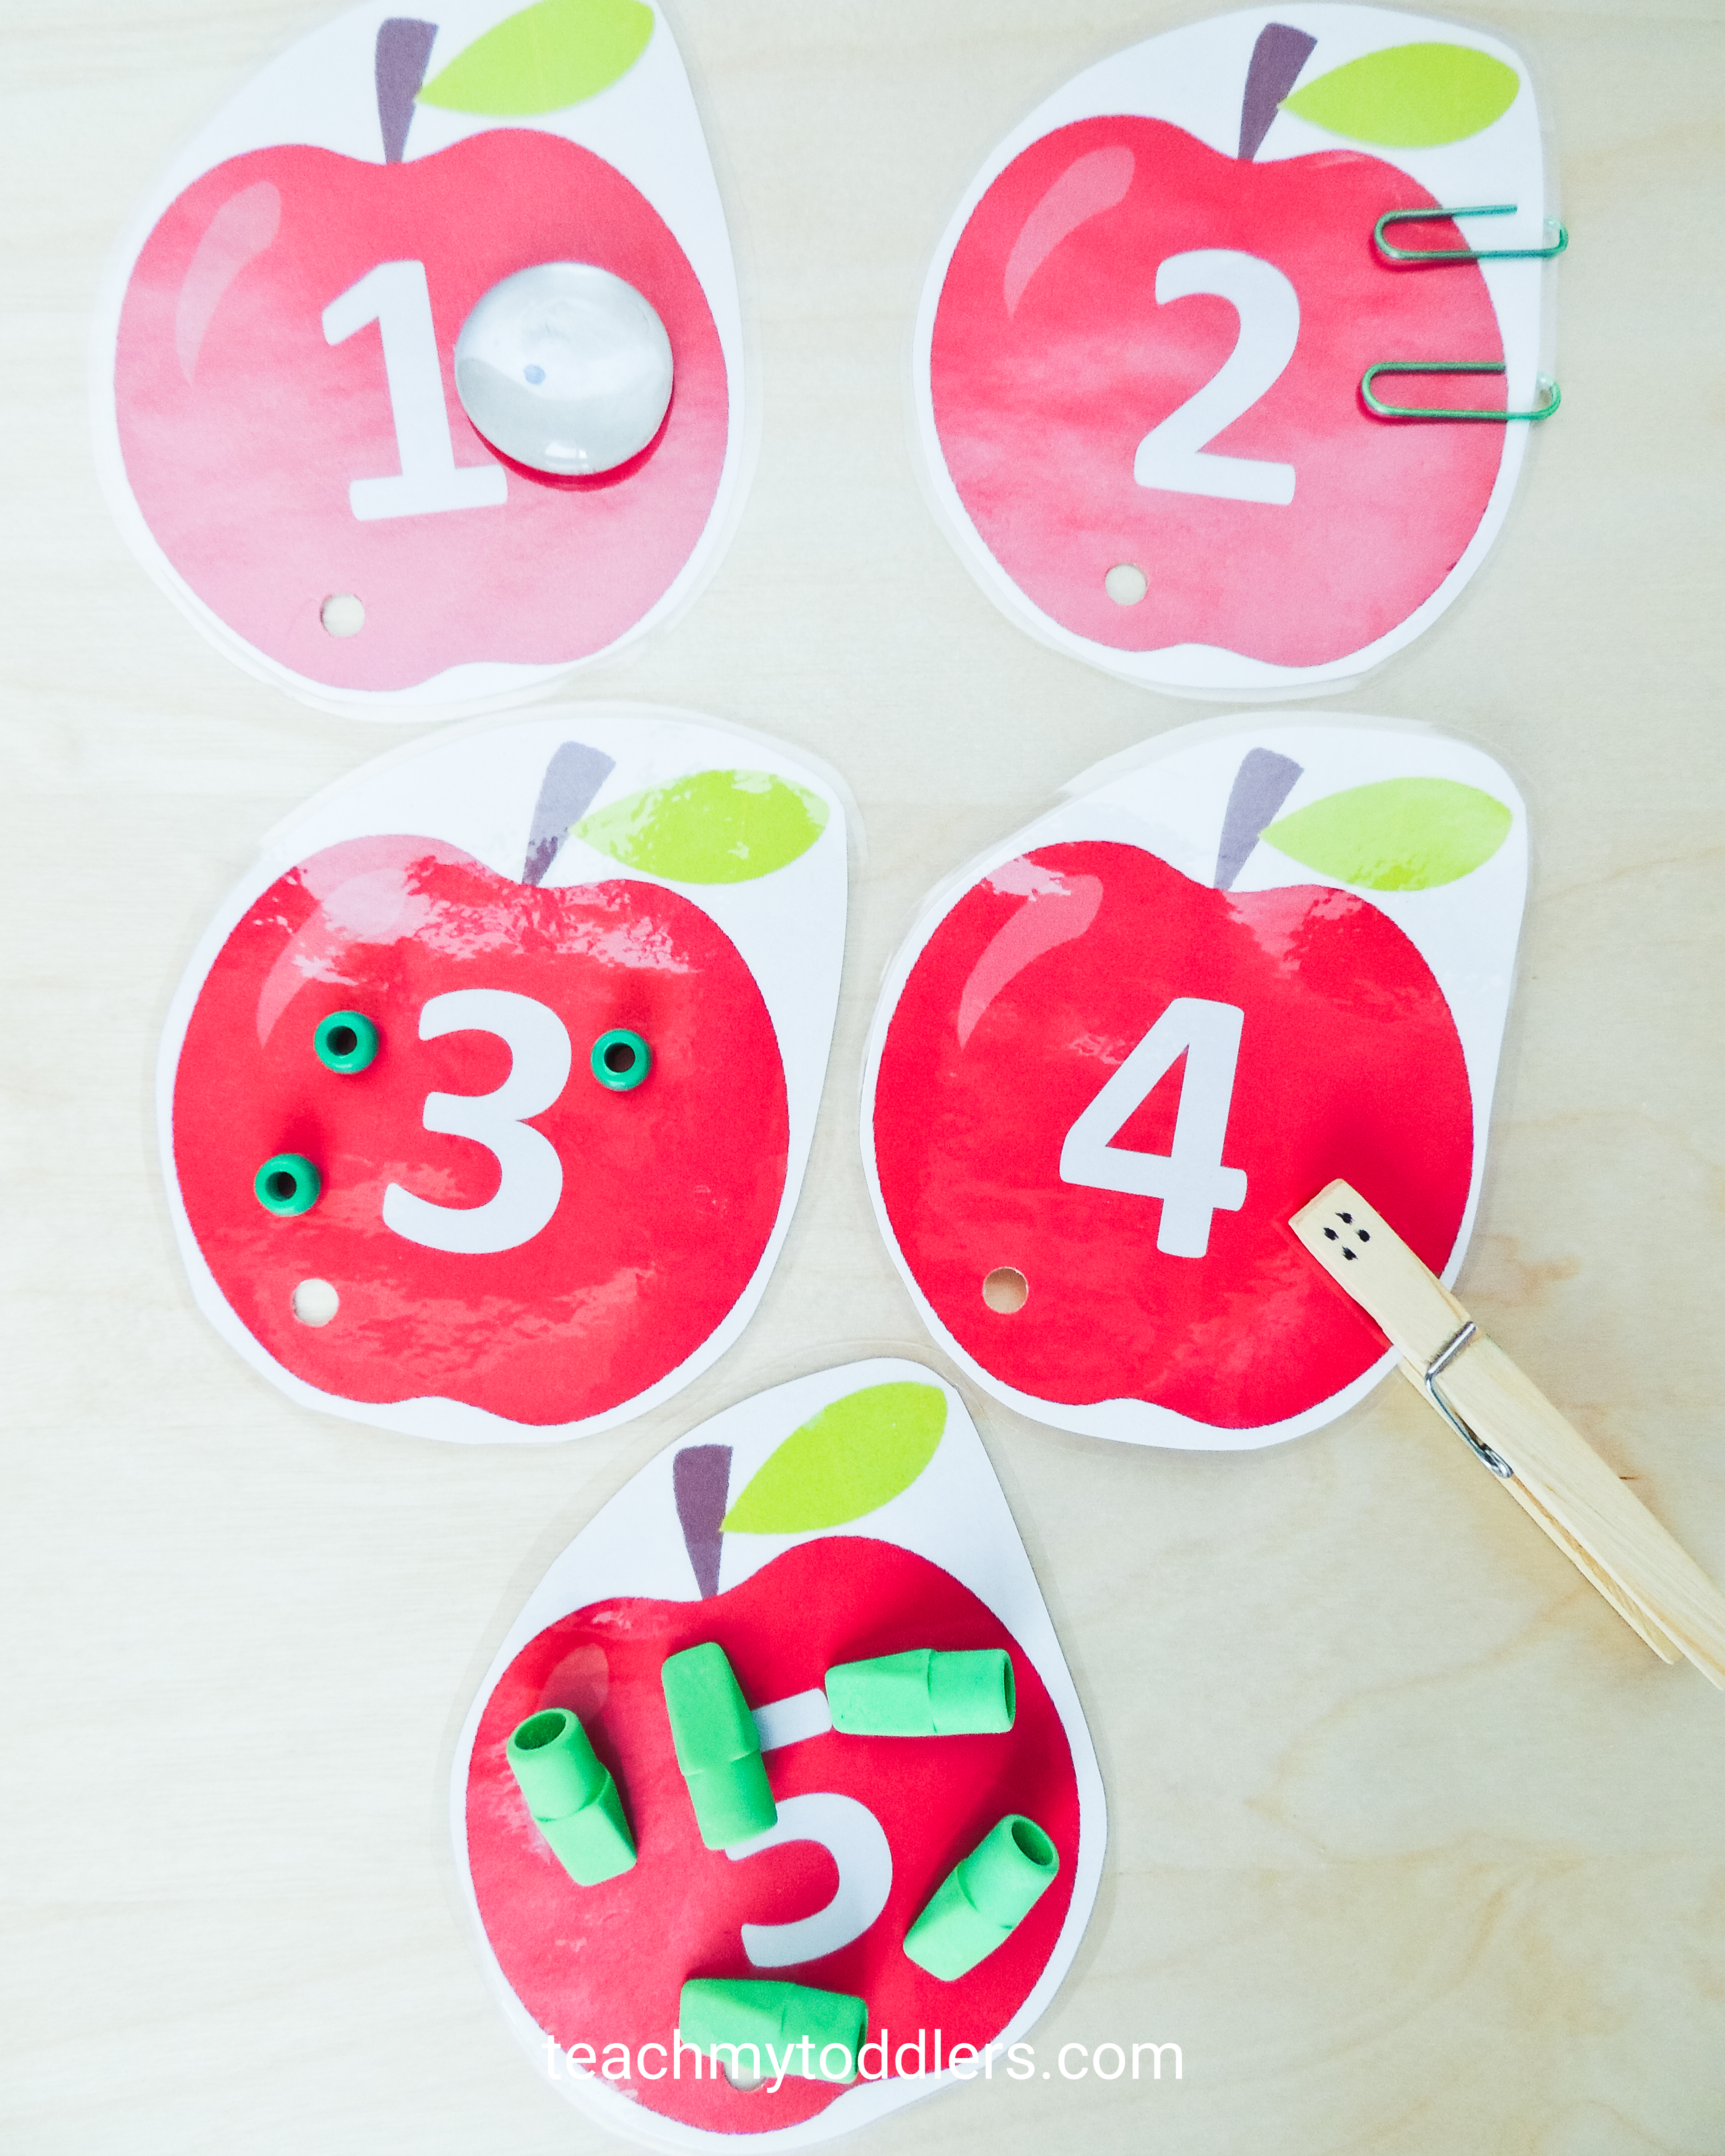 Teach your toddlers numbers with these awesome counting activities trays